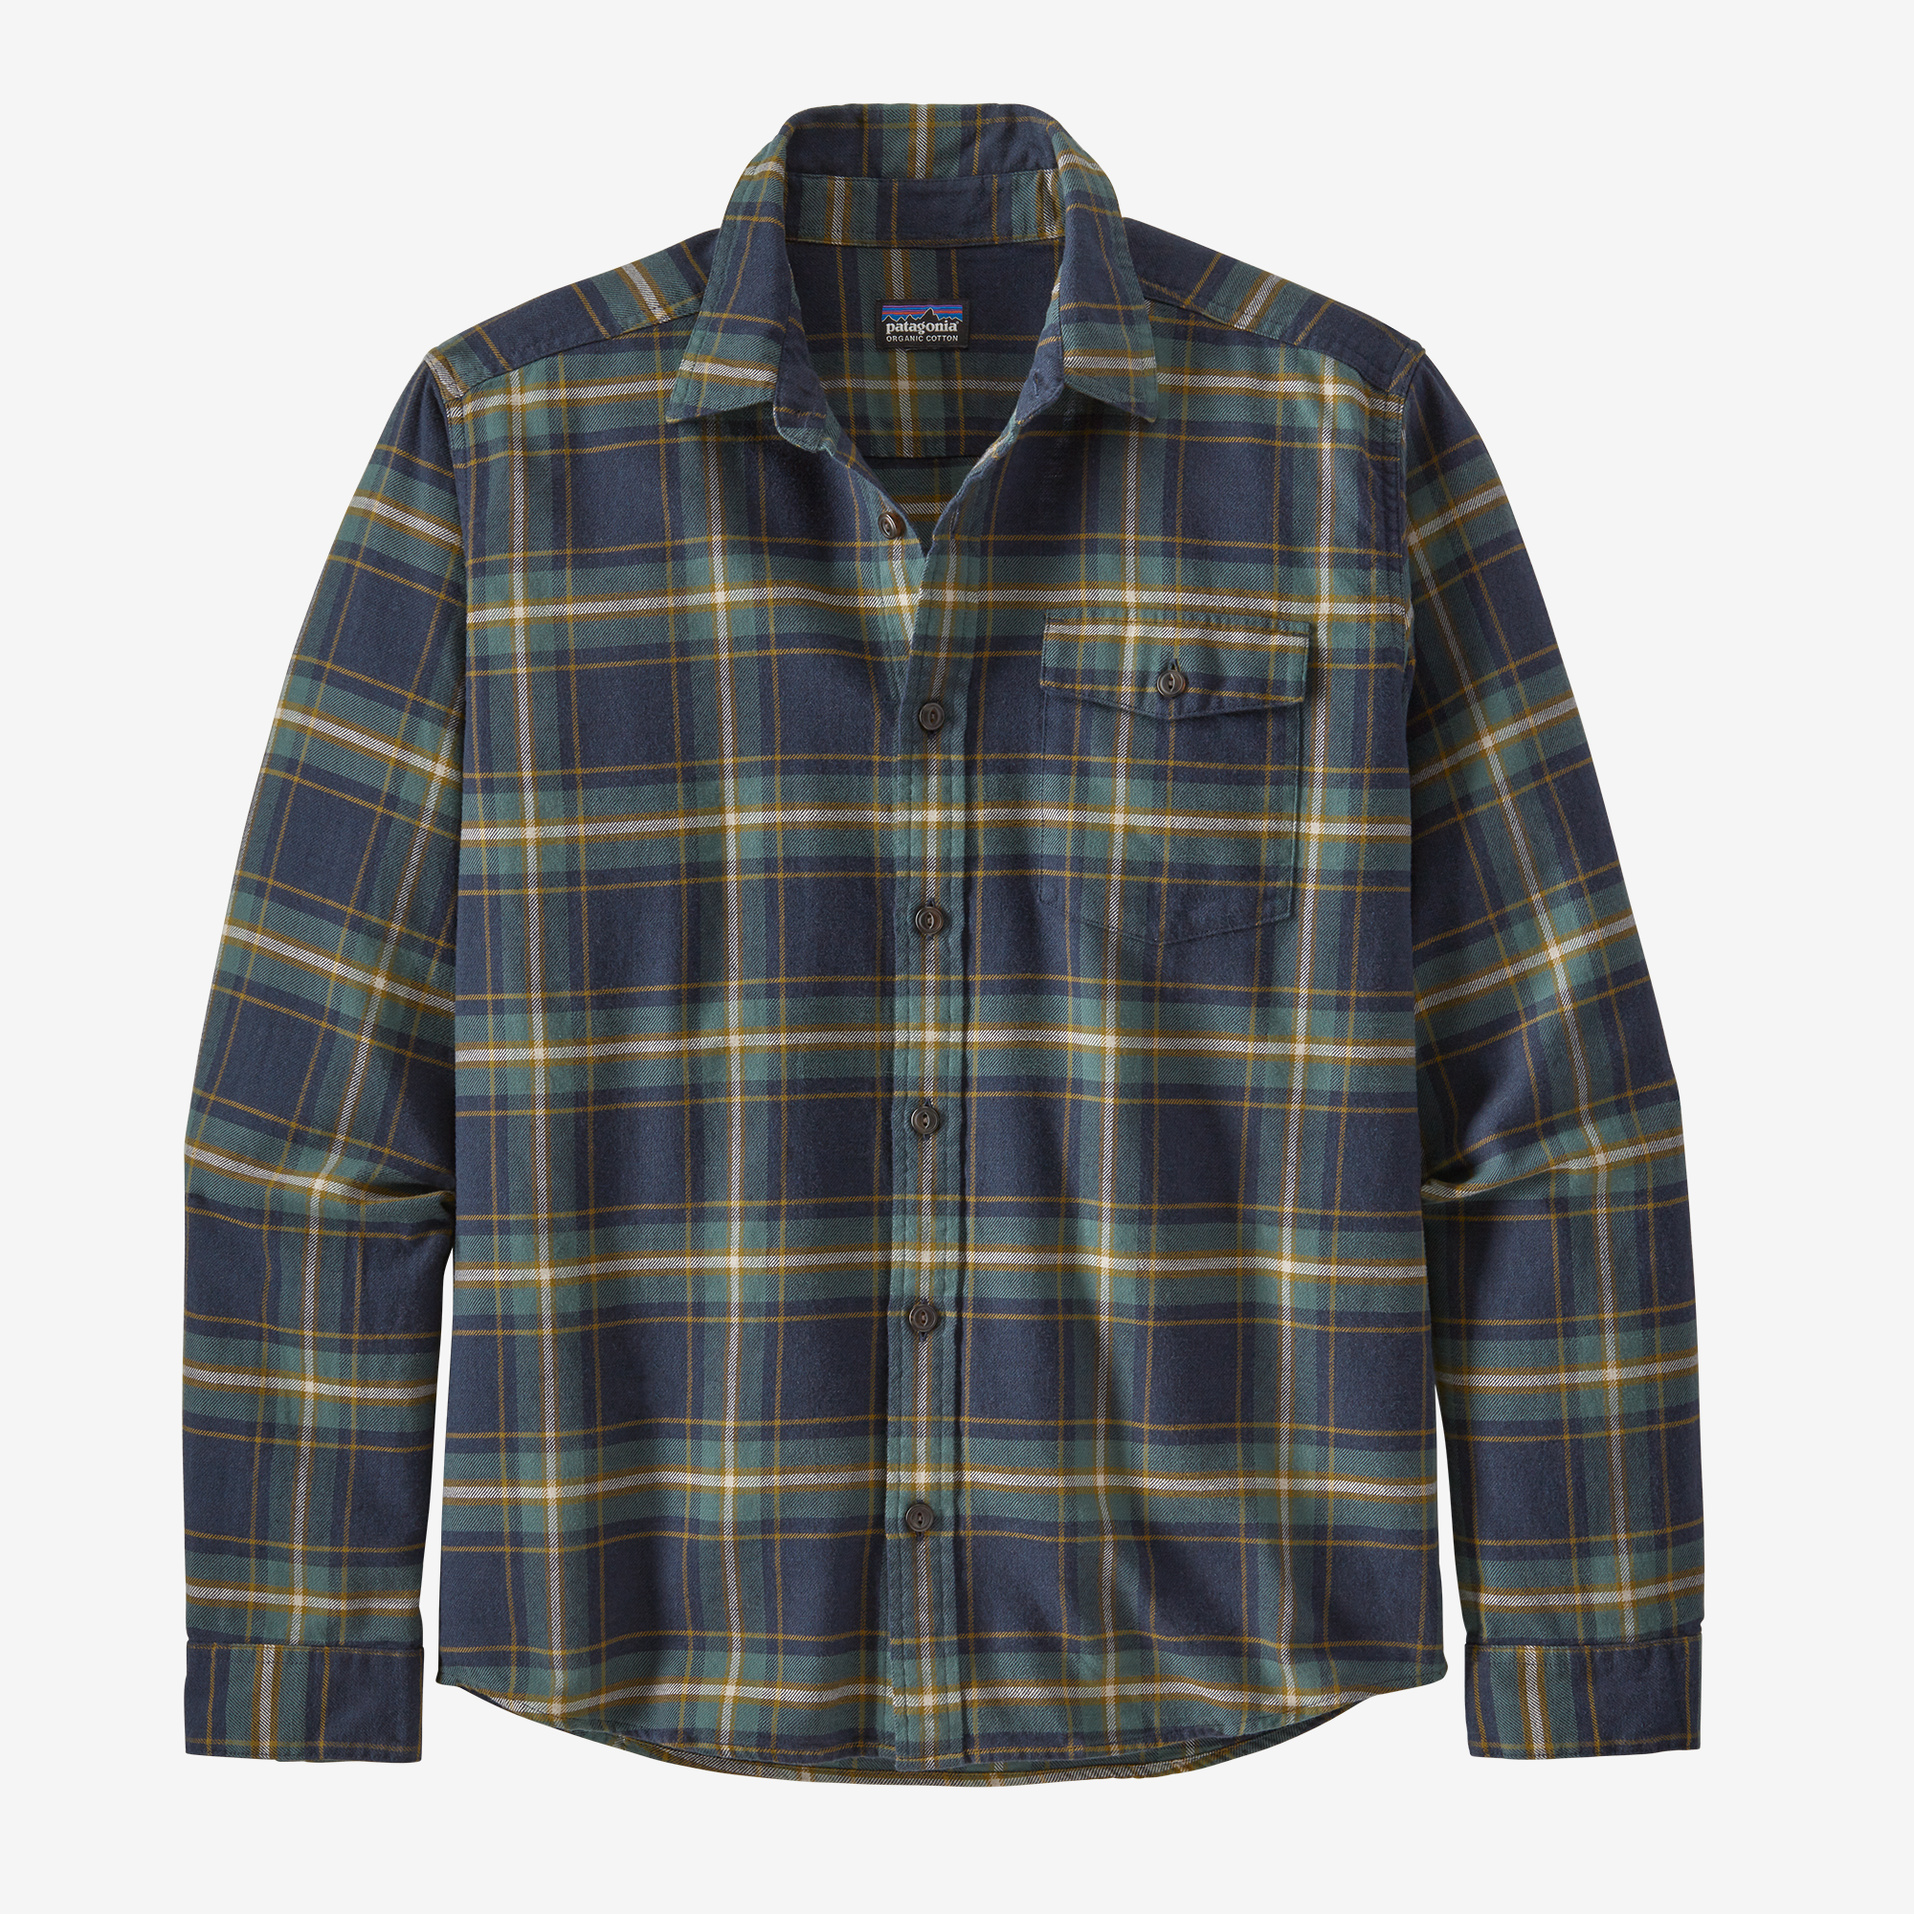 Patagonia M's L/S L/W Fjord Flannel Shirt - Lawrence: New Navy - Small